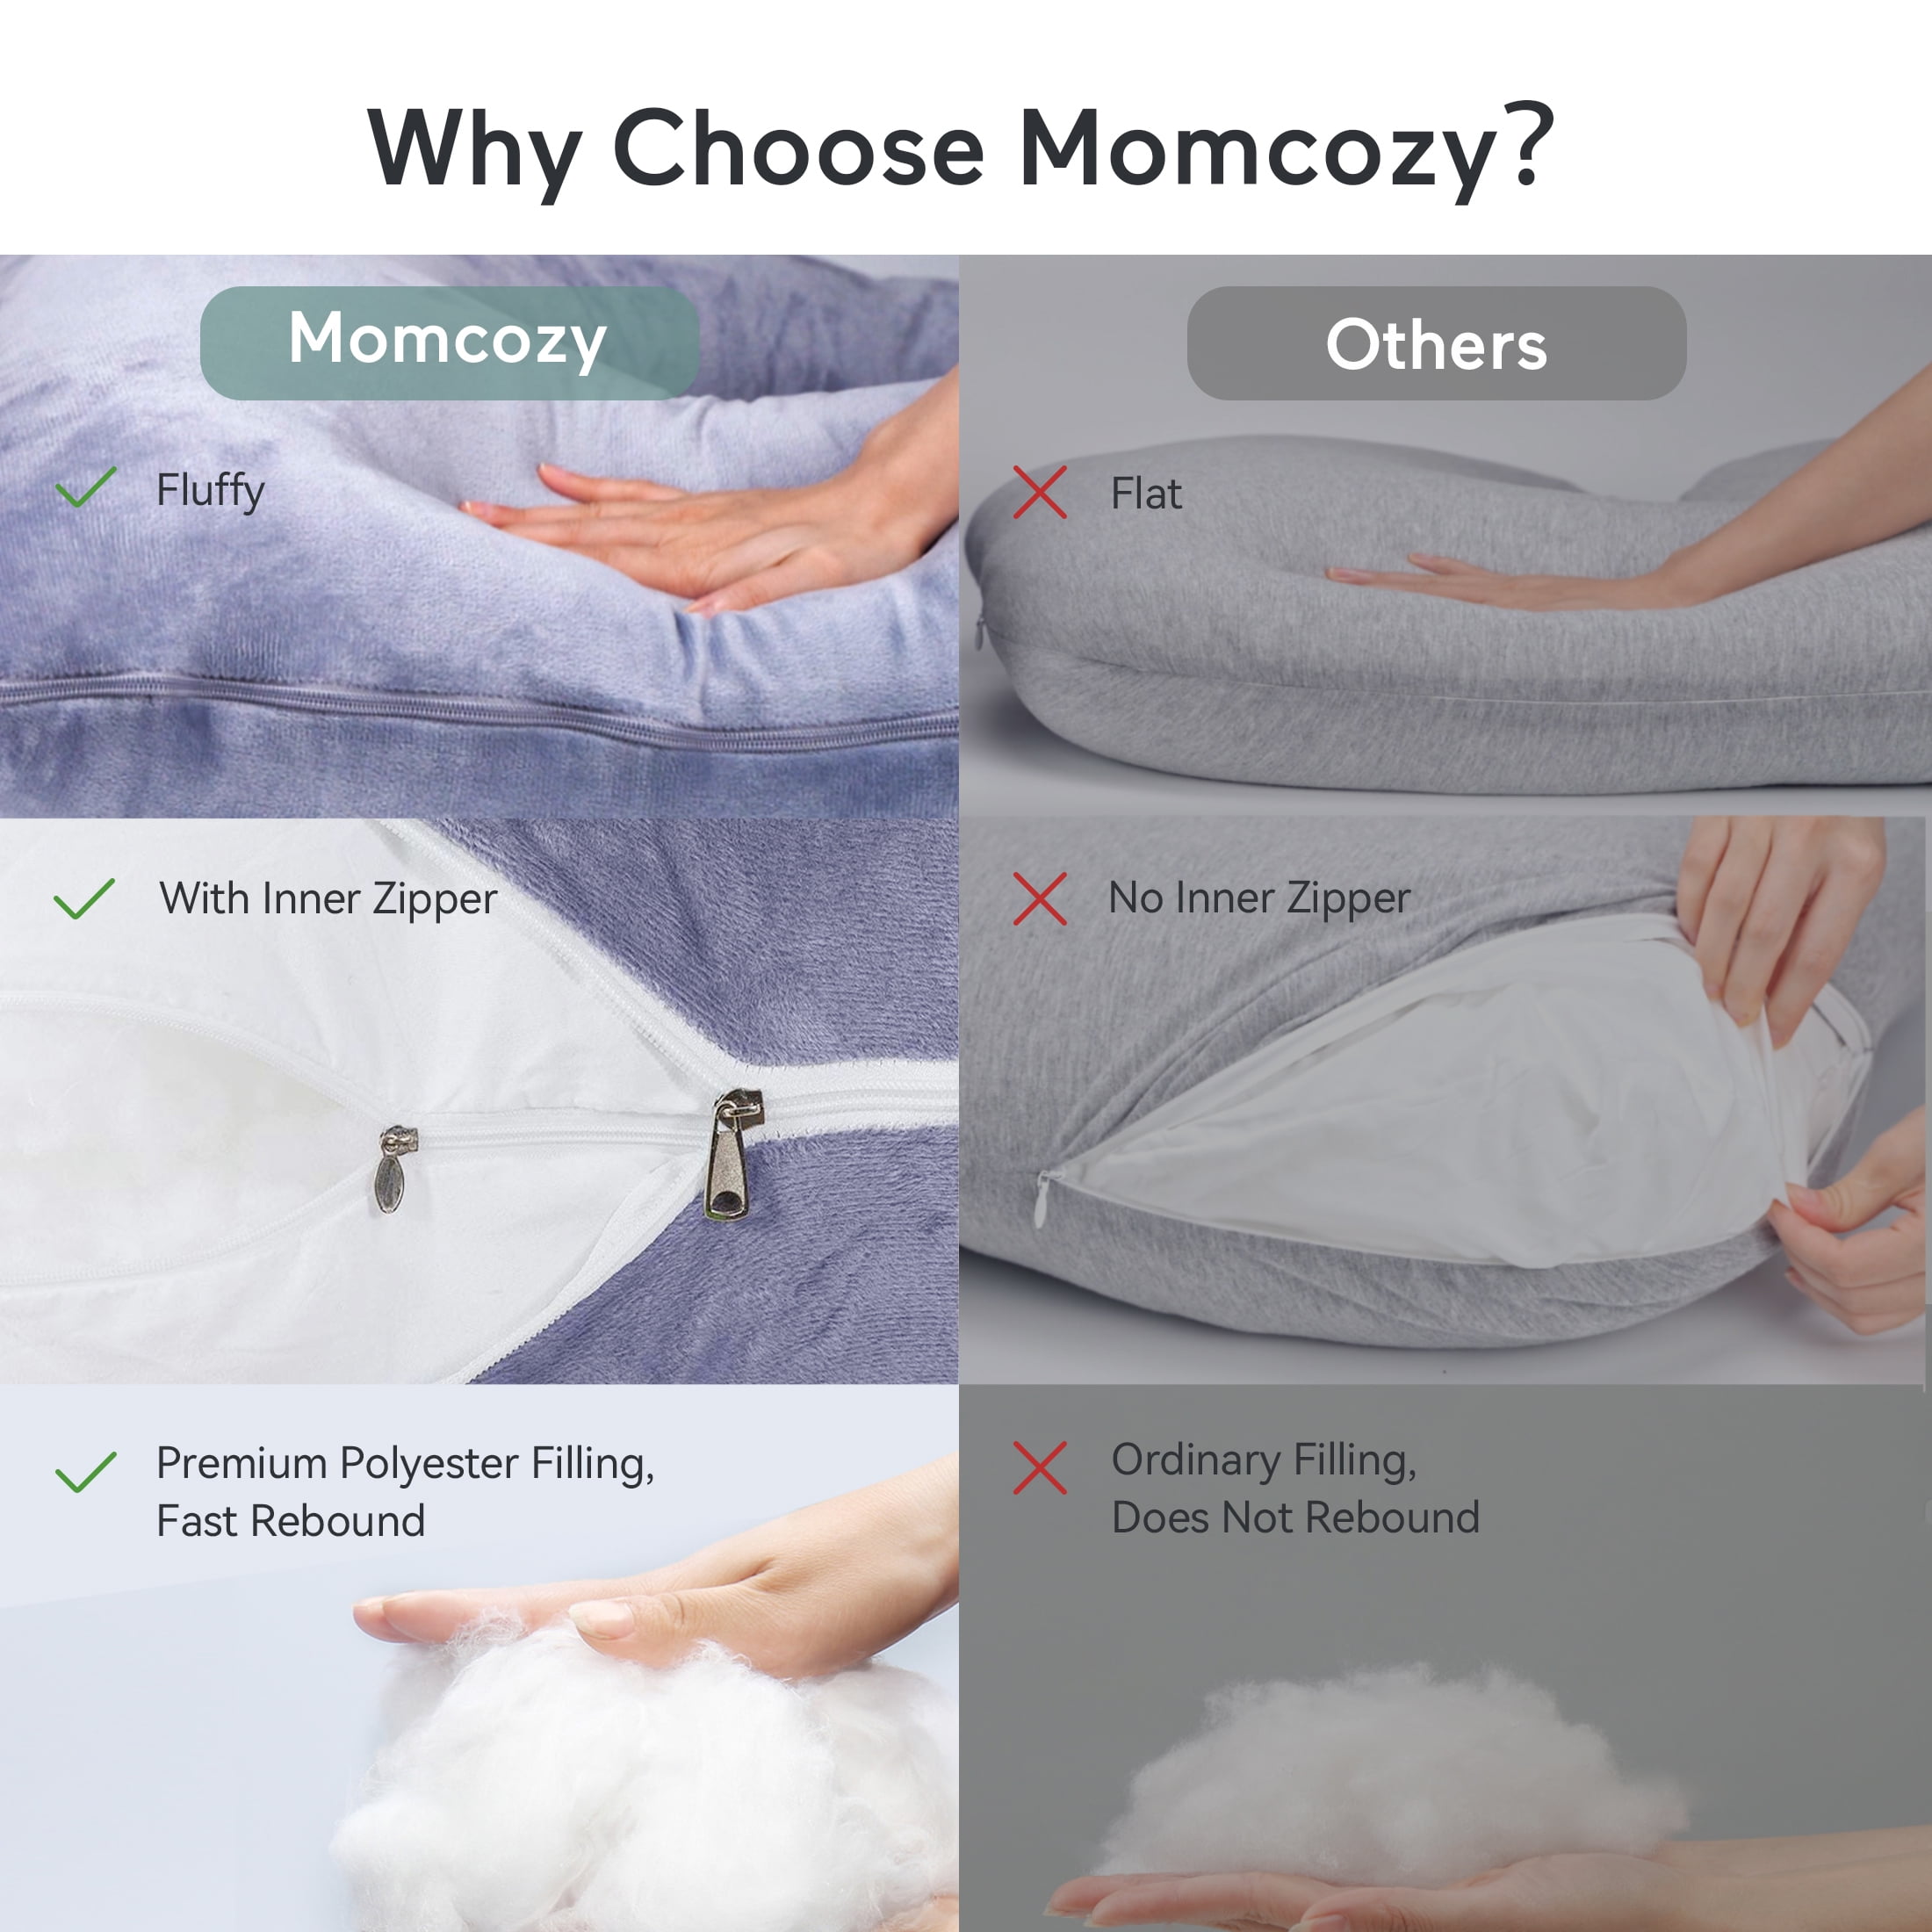 57 Inch Maternity Pillow Momcozy Pregnancy Pillows for Sleeping Grey U Shaped Full Body Pillow for Pregnancy Women with Removable Jersey Cotton Cover 